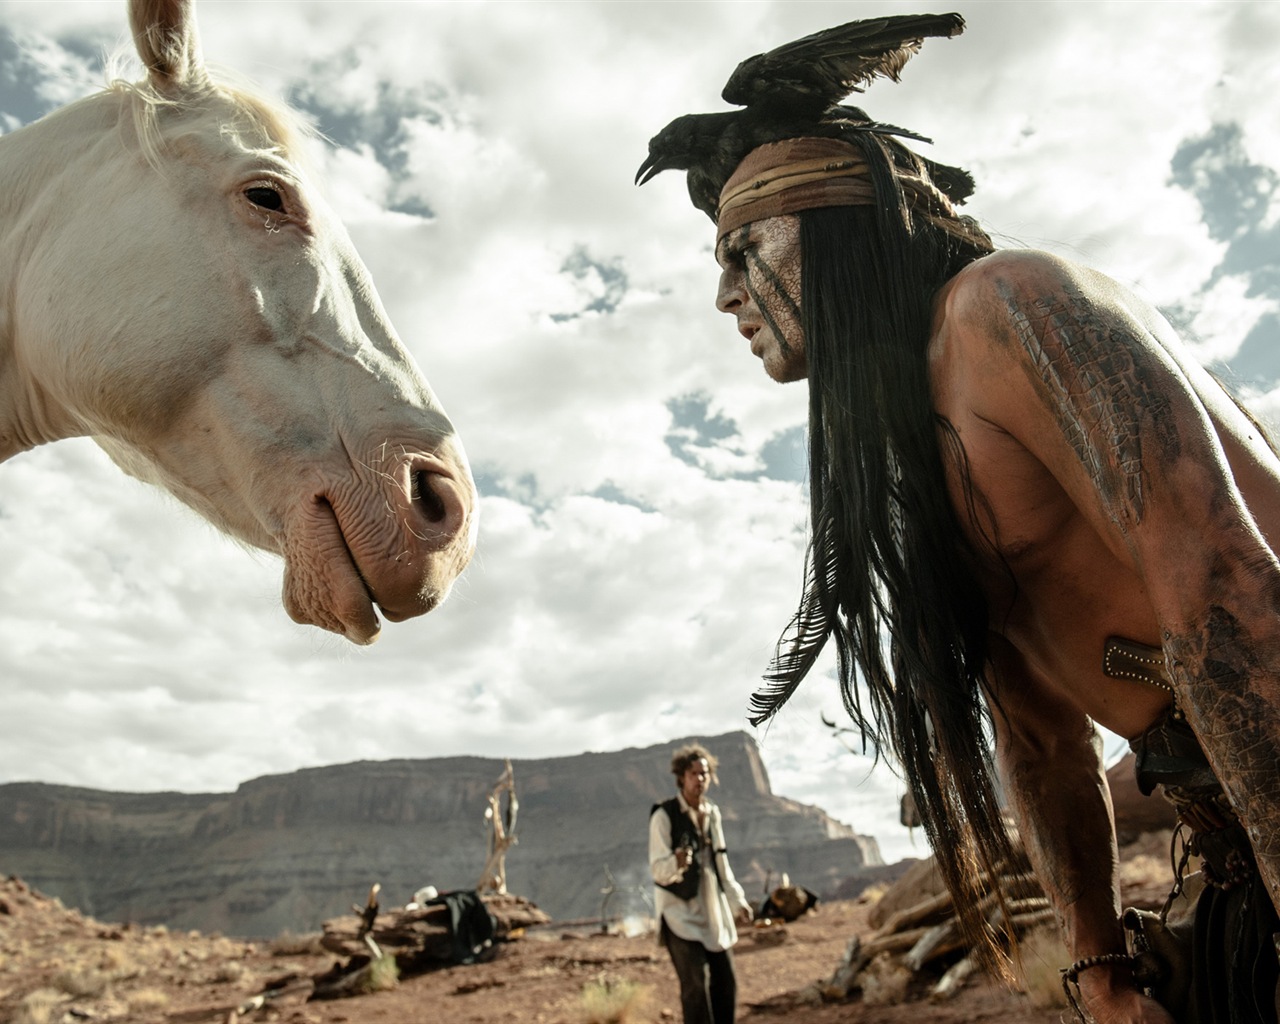 The Lone Ranger HD movie wallpapers #19 - 1280x1024